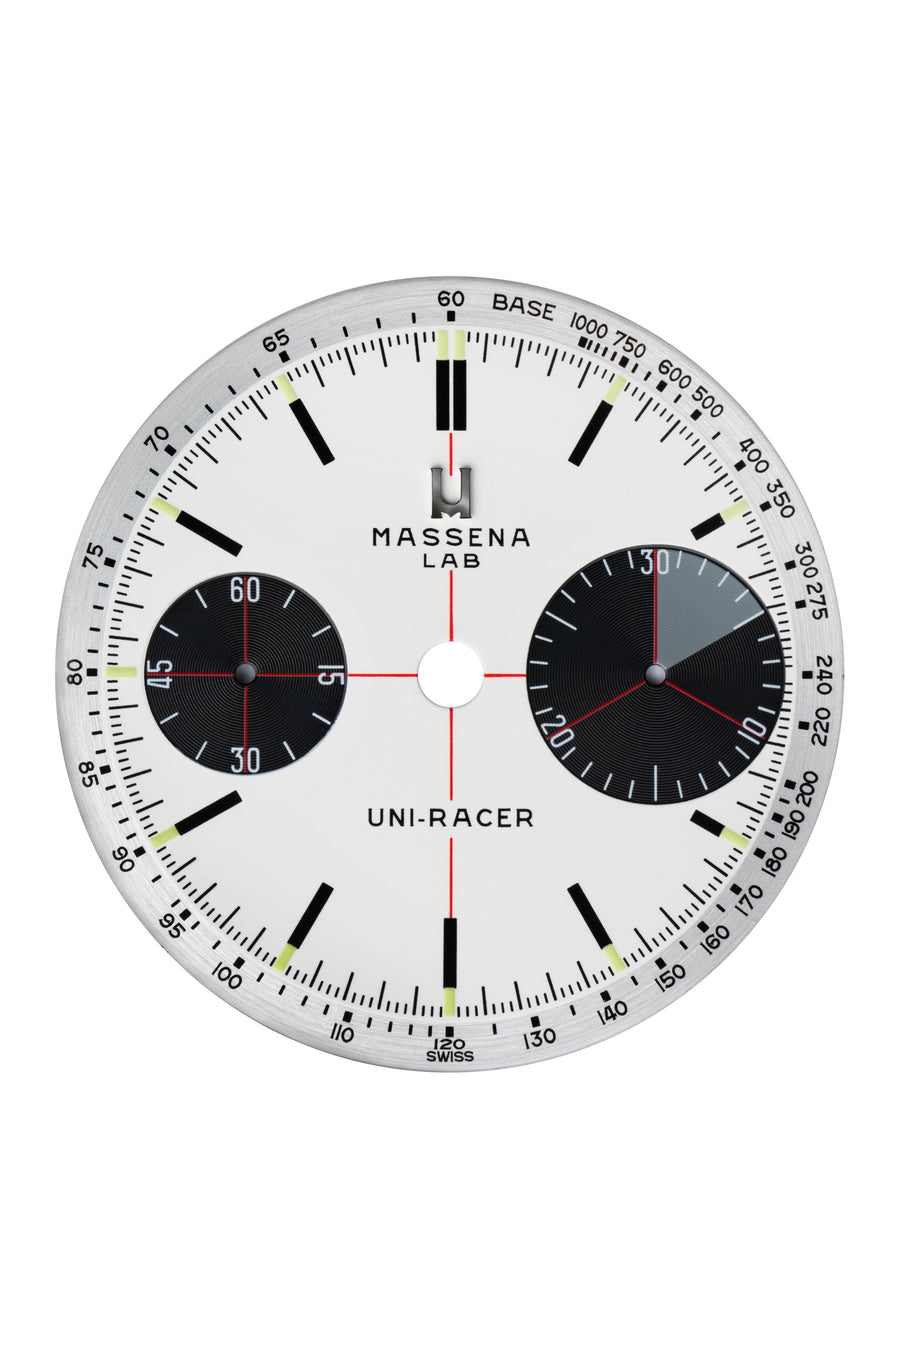 The dial of the Massena LAB Uni-Racer chronograph wristwatch is configured in a “Panda” white dial and features a 30 minutes “Big Eye” counter as well as a small seconds counter. 